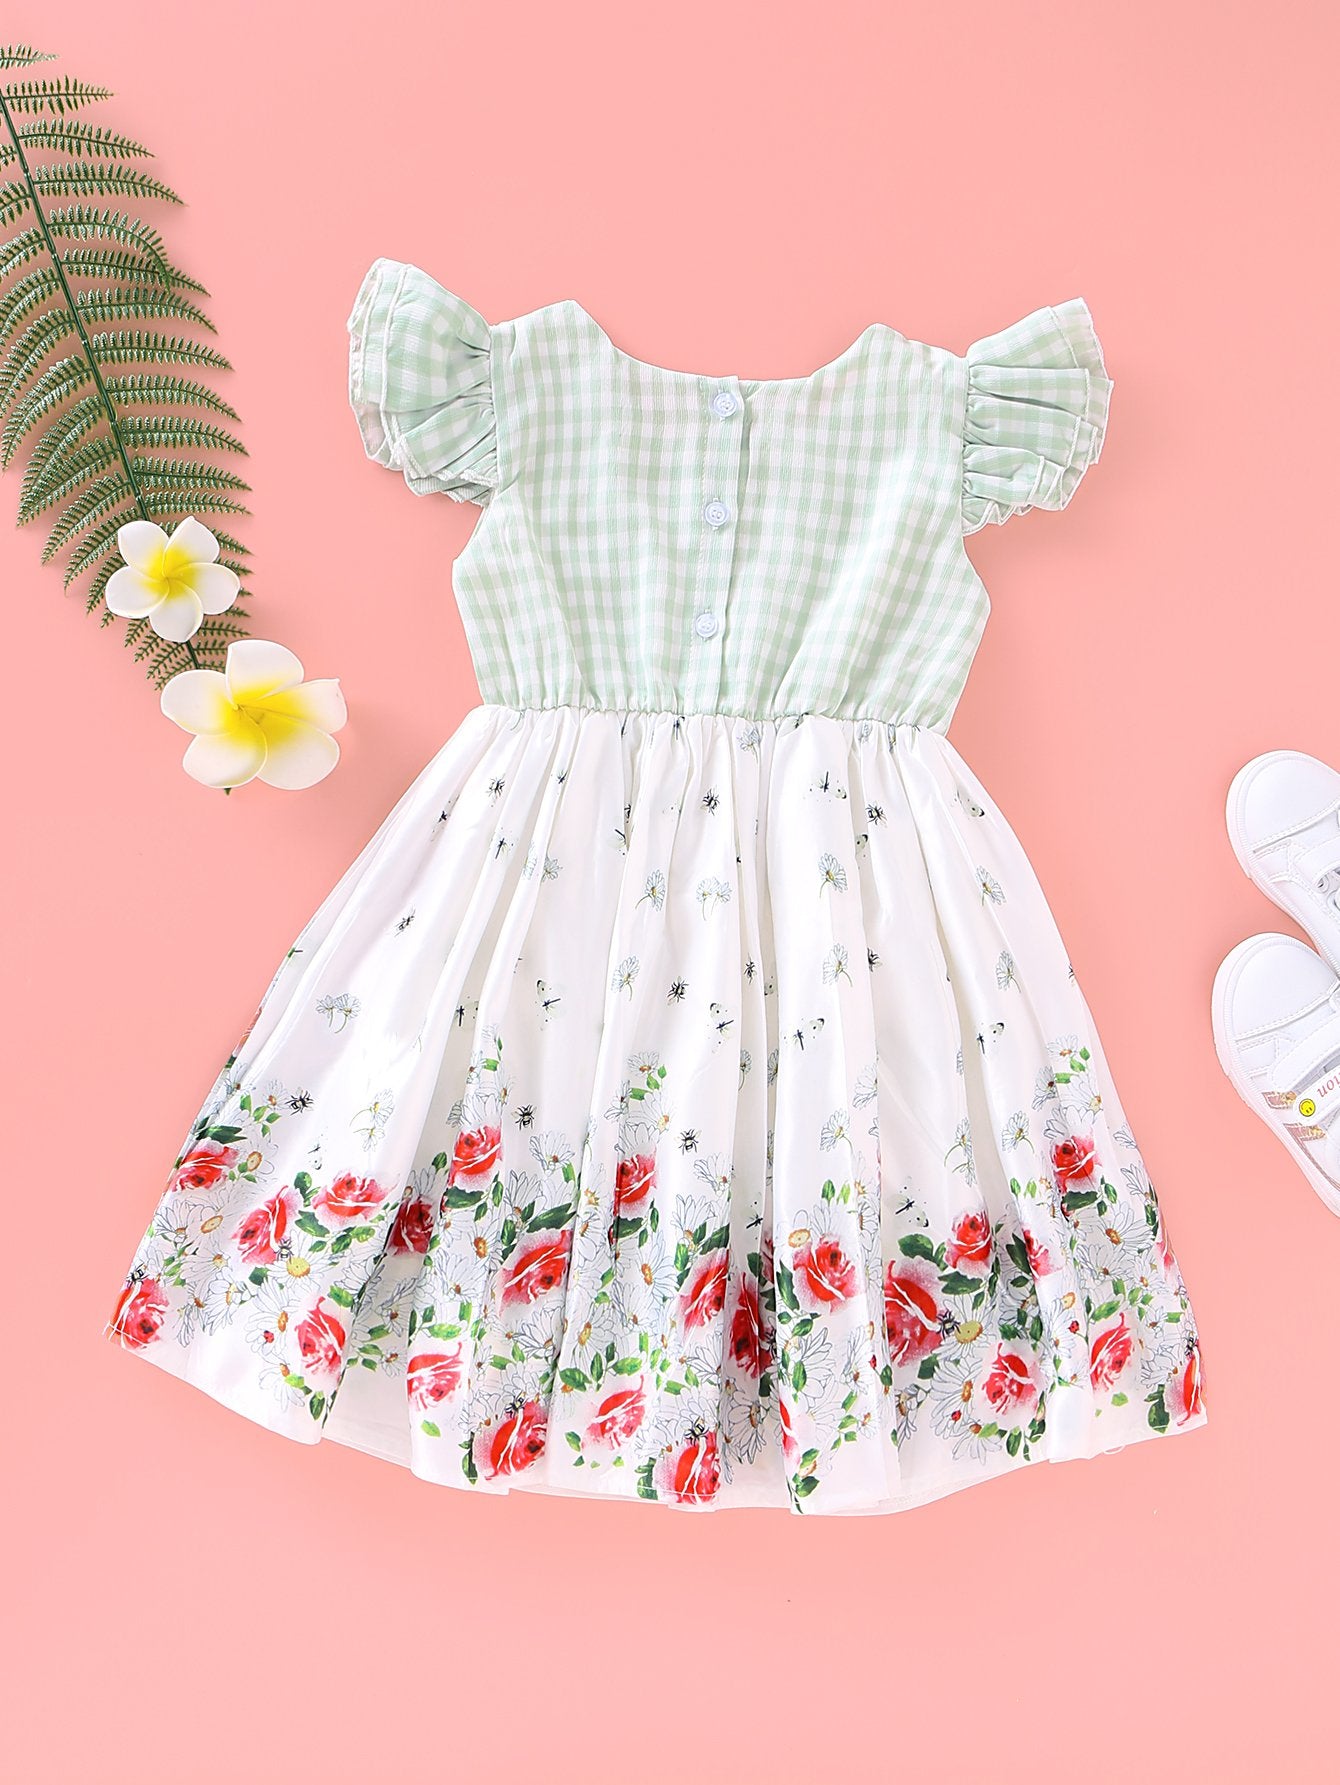 Baby Girls Plaid Floral Butterfly Embroidery Dress